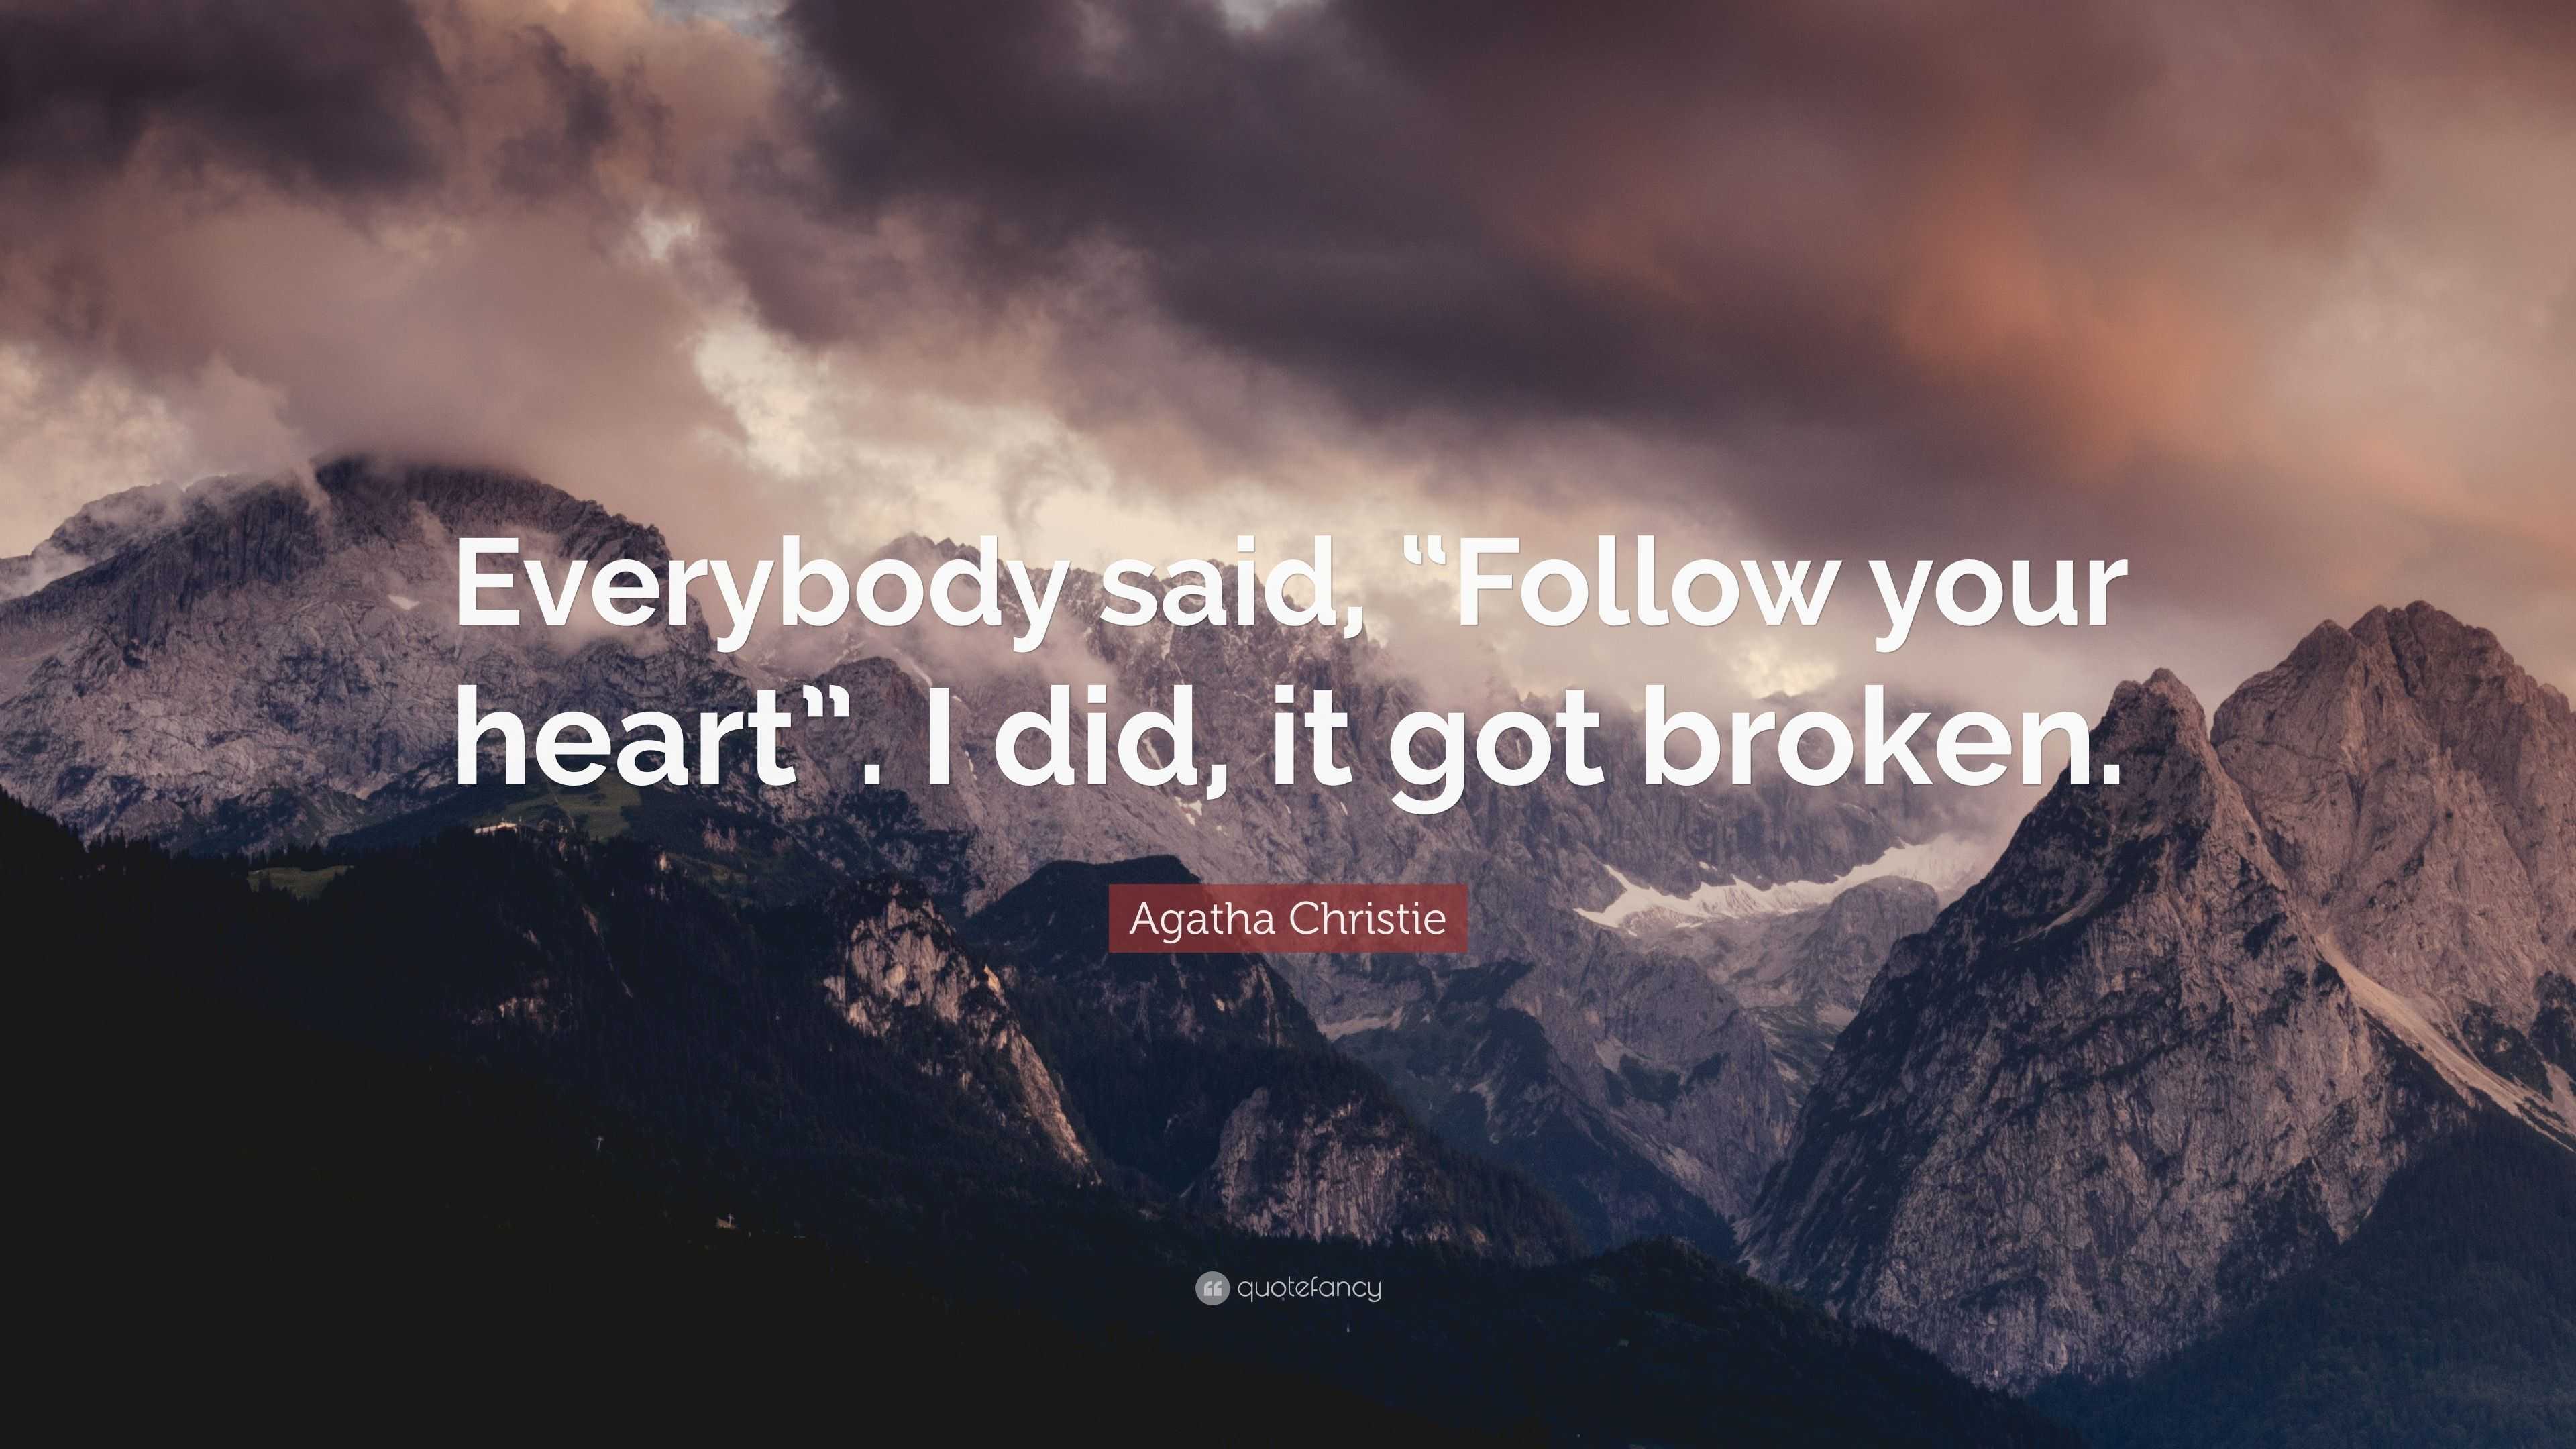 Agatha Christie Quote: “Everybody said, “Follow your heart”. I did, it ...